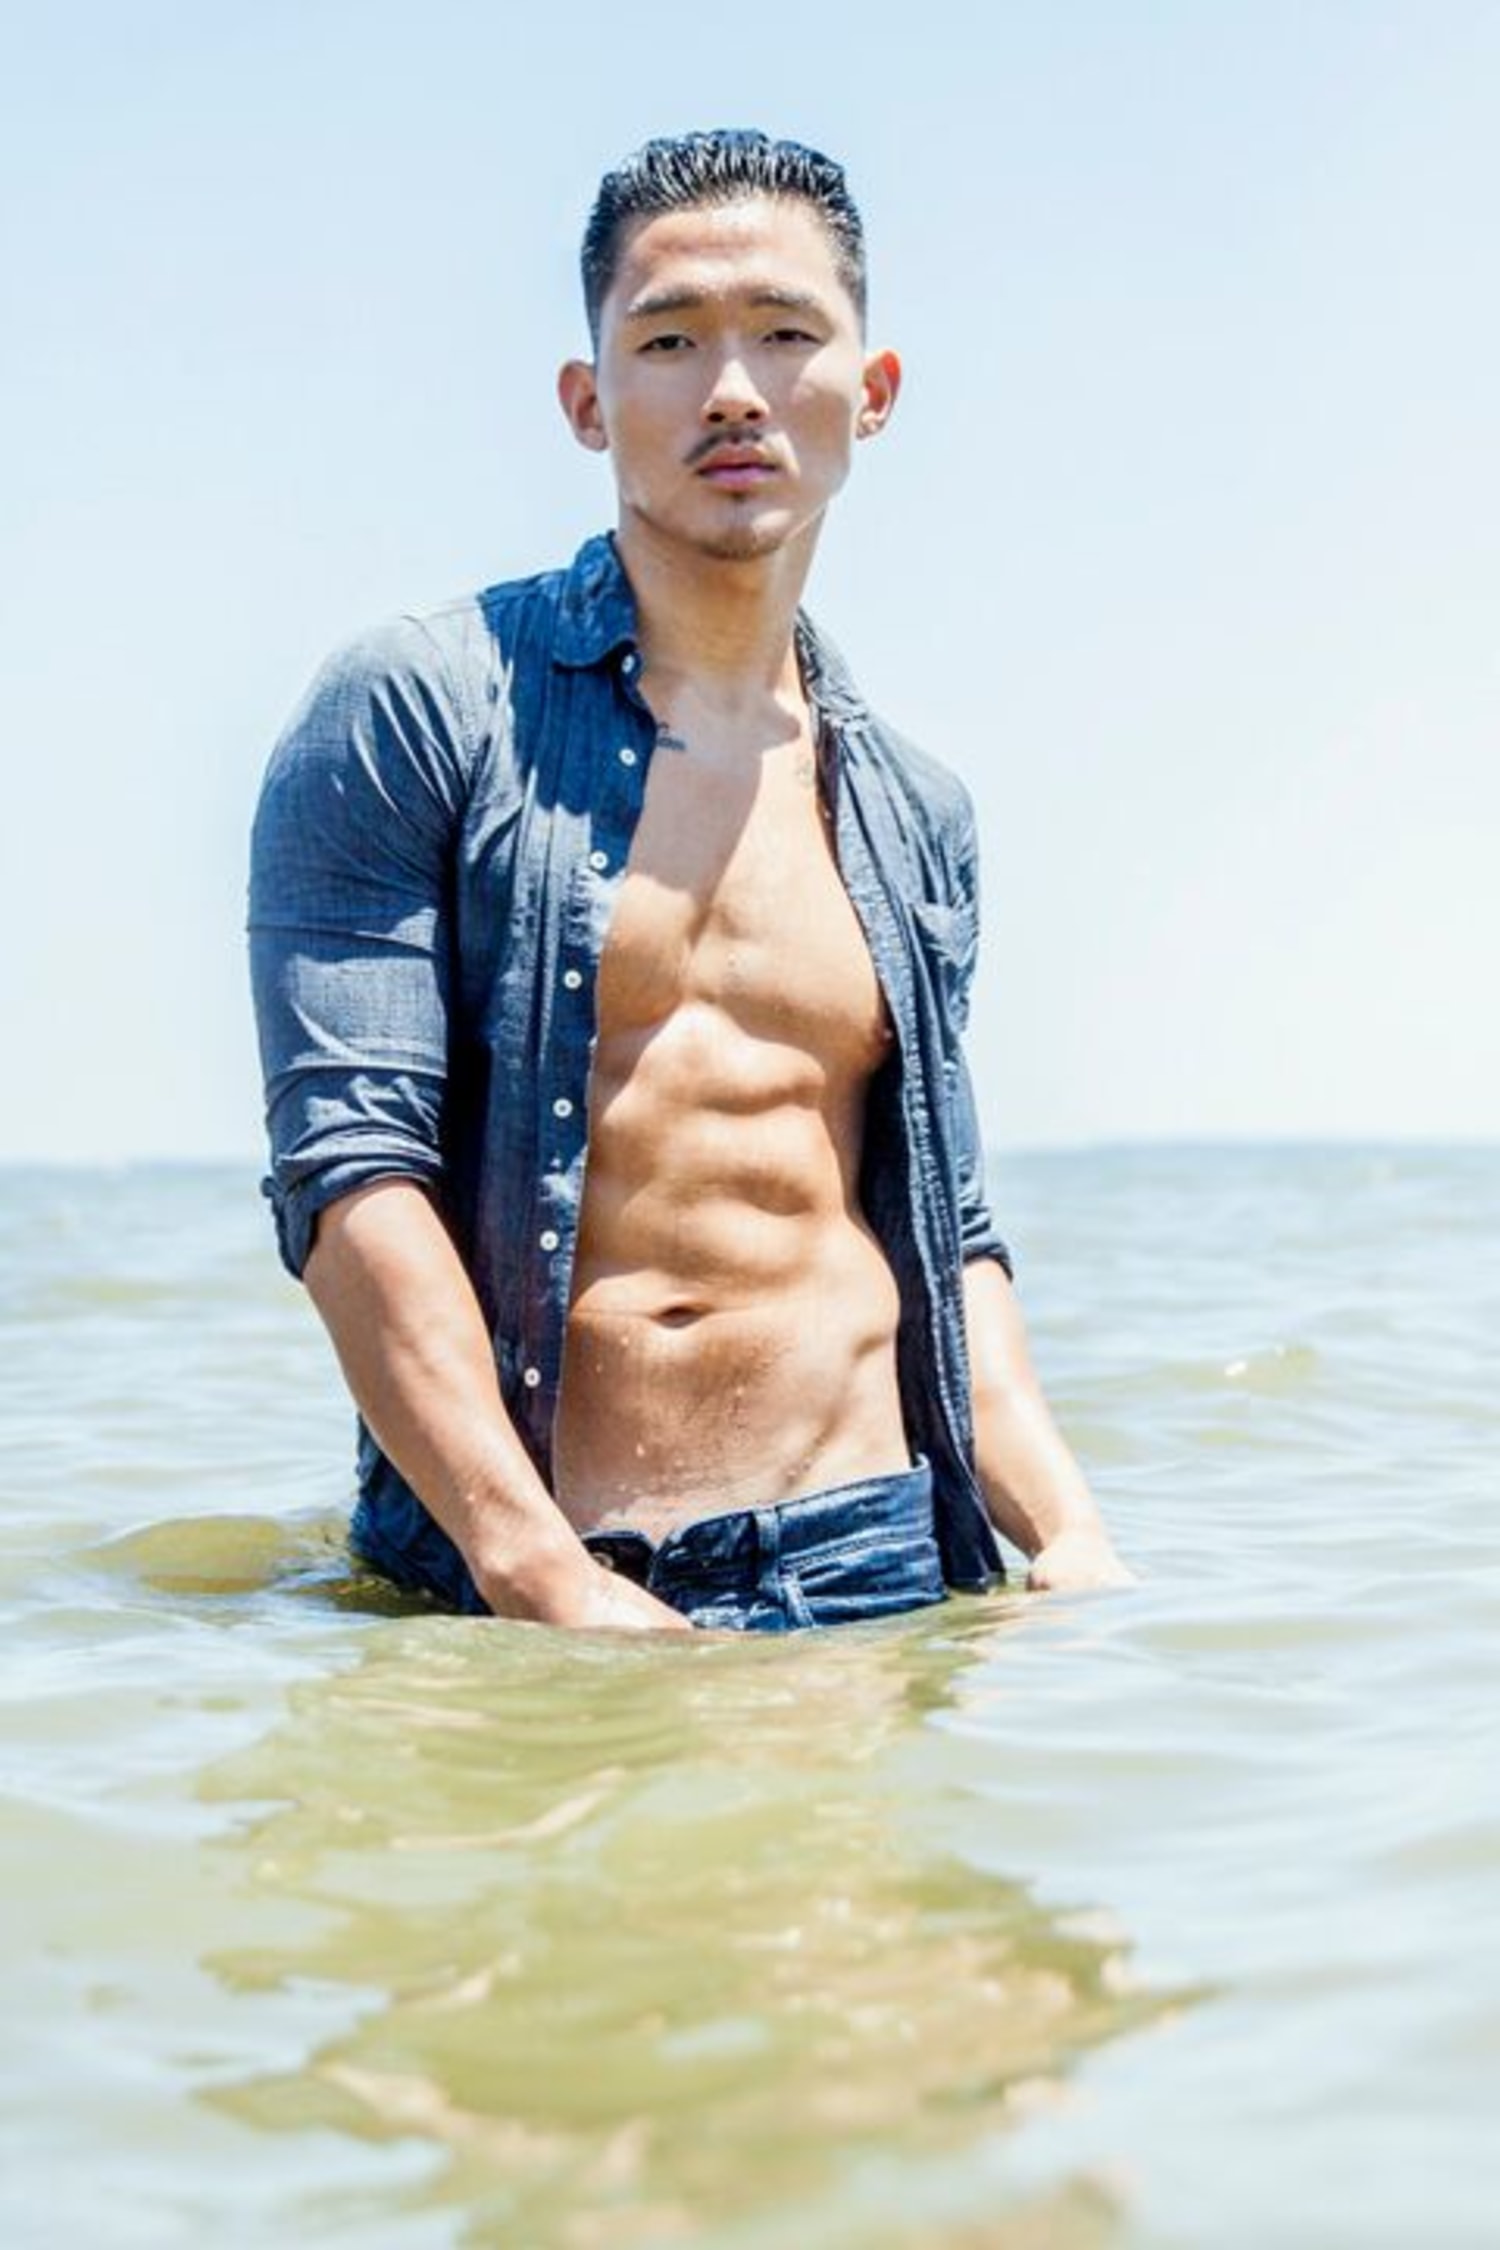 Justin Kim From Small Town, USA to 'America's Next Top Model'